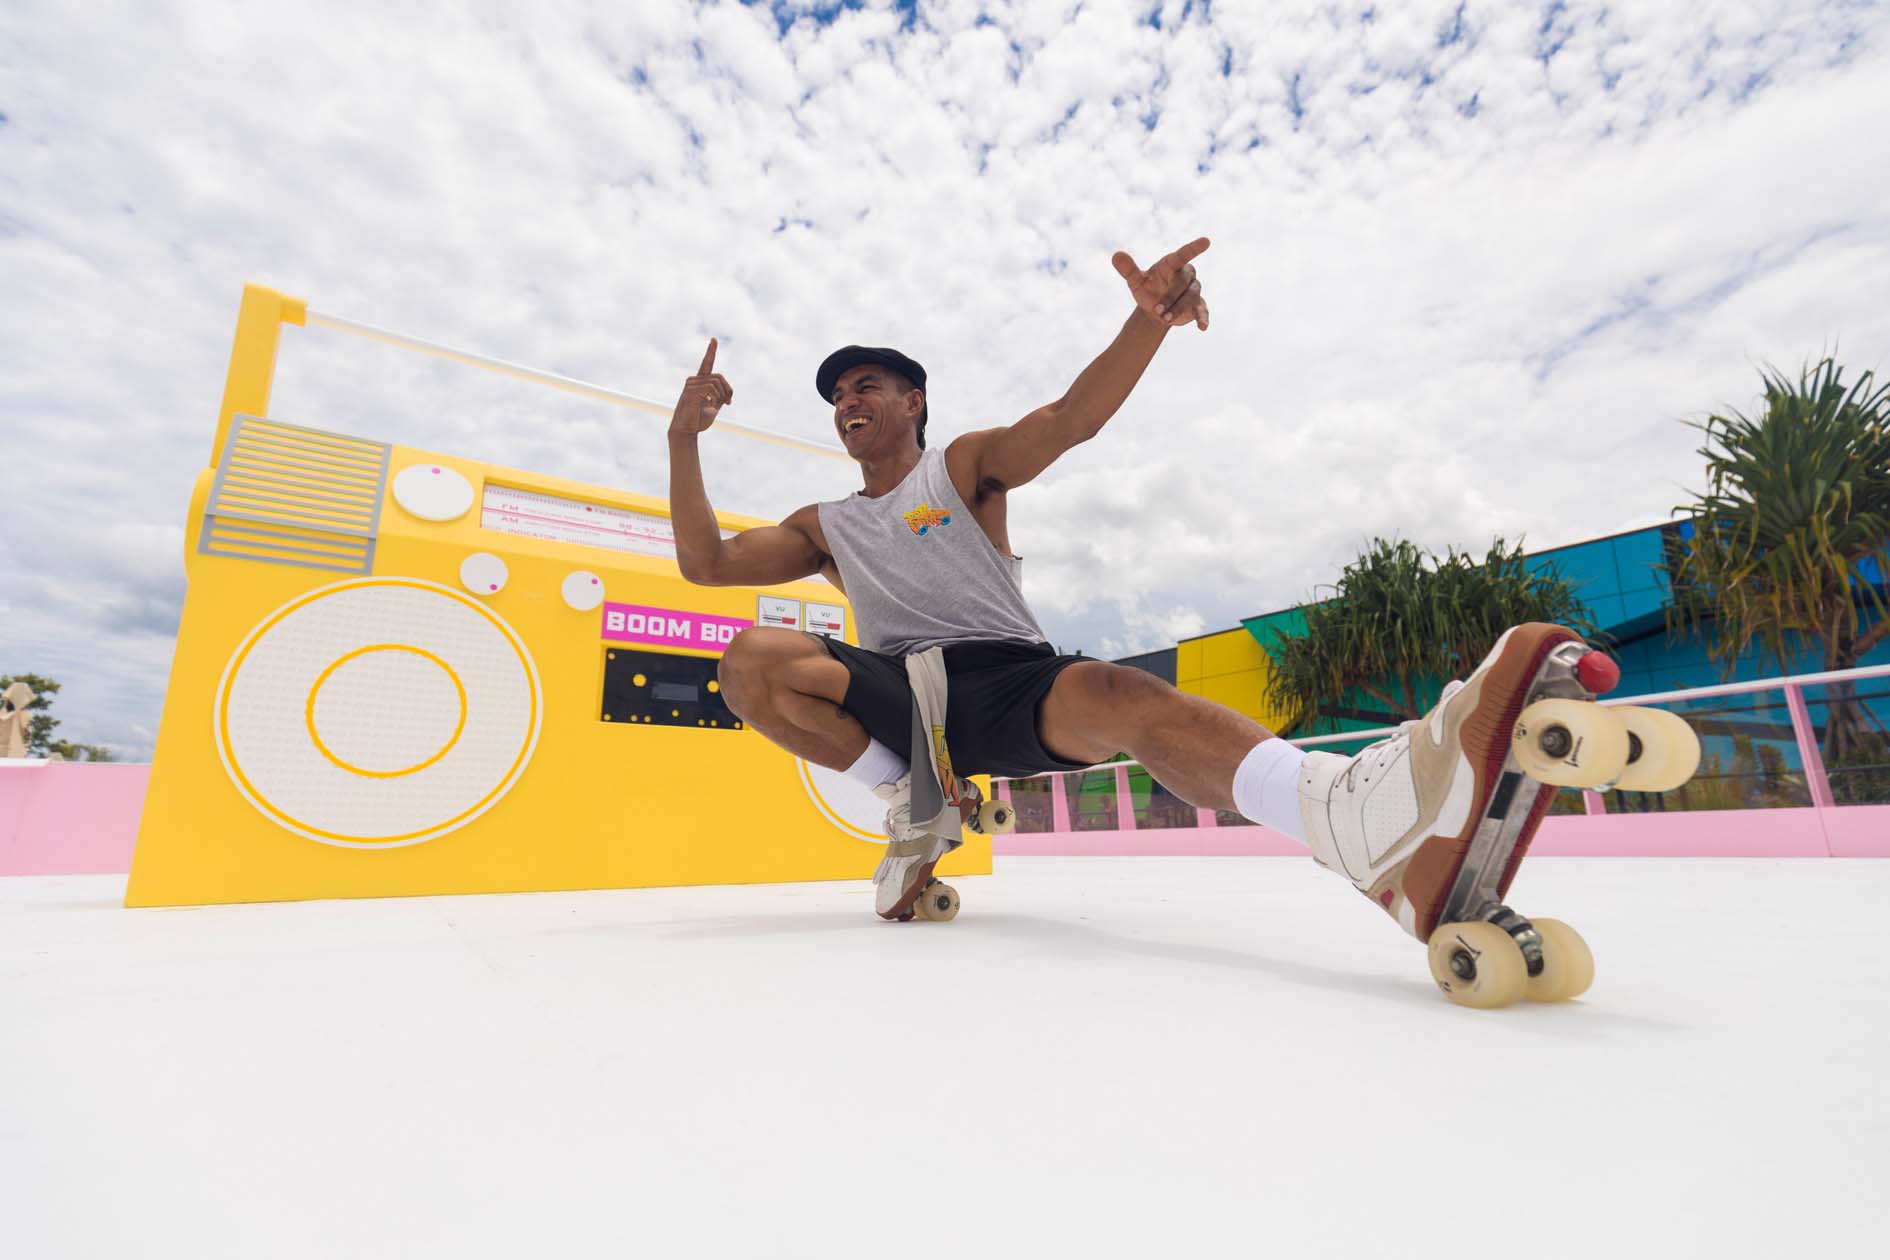 A pop up roller skating rink is coming to Riverlink